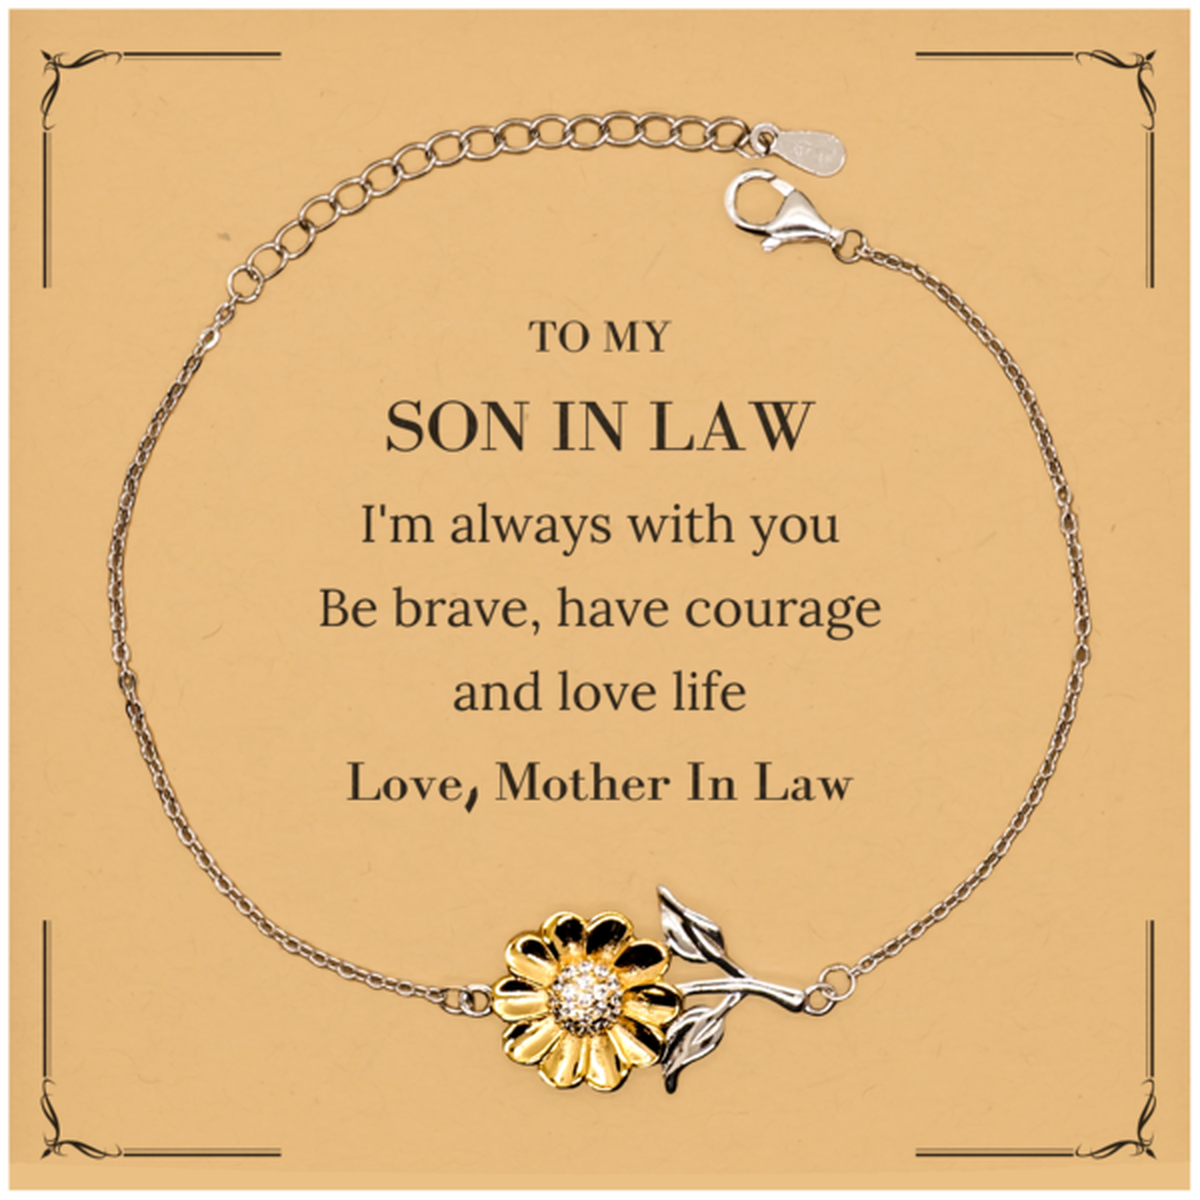 To My Son In Law Gifts from Mother In Law, Unique Sunflower Bracelet Inspirational Christmas Birthday Graduation Gifts for Son In Law I'm always with you. Be brave, have courage and love life. Love, Mother In Law